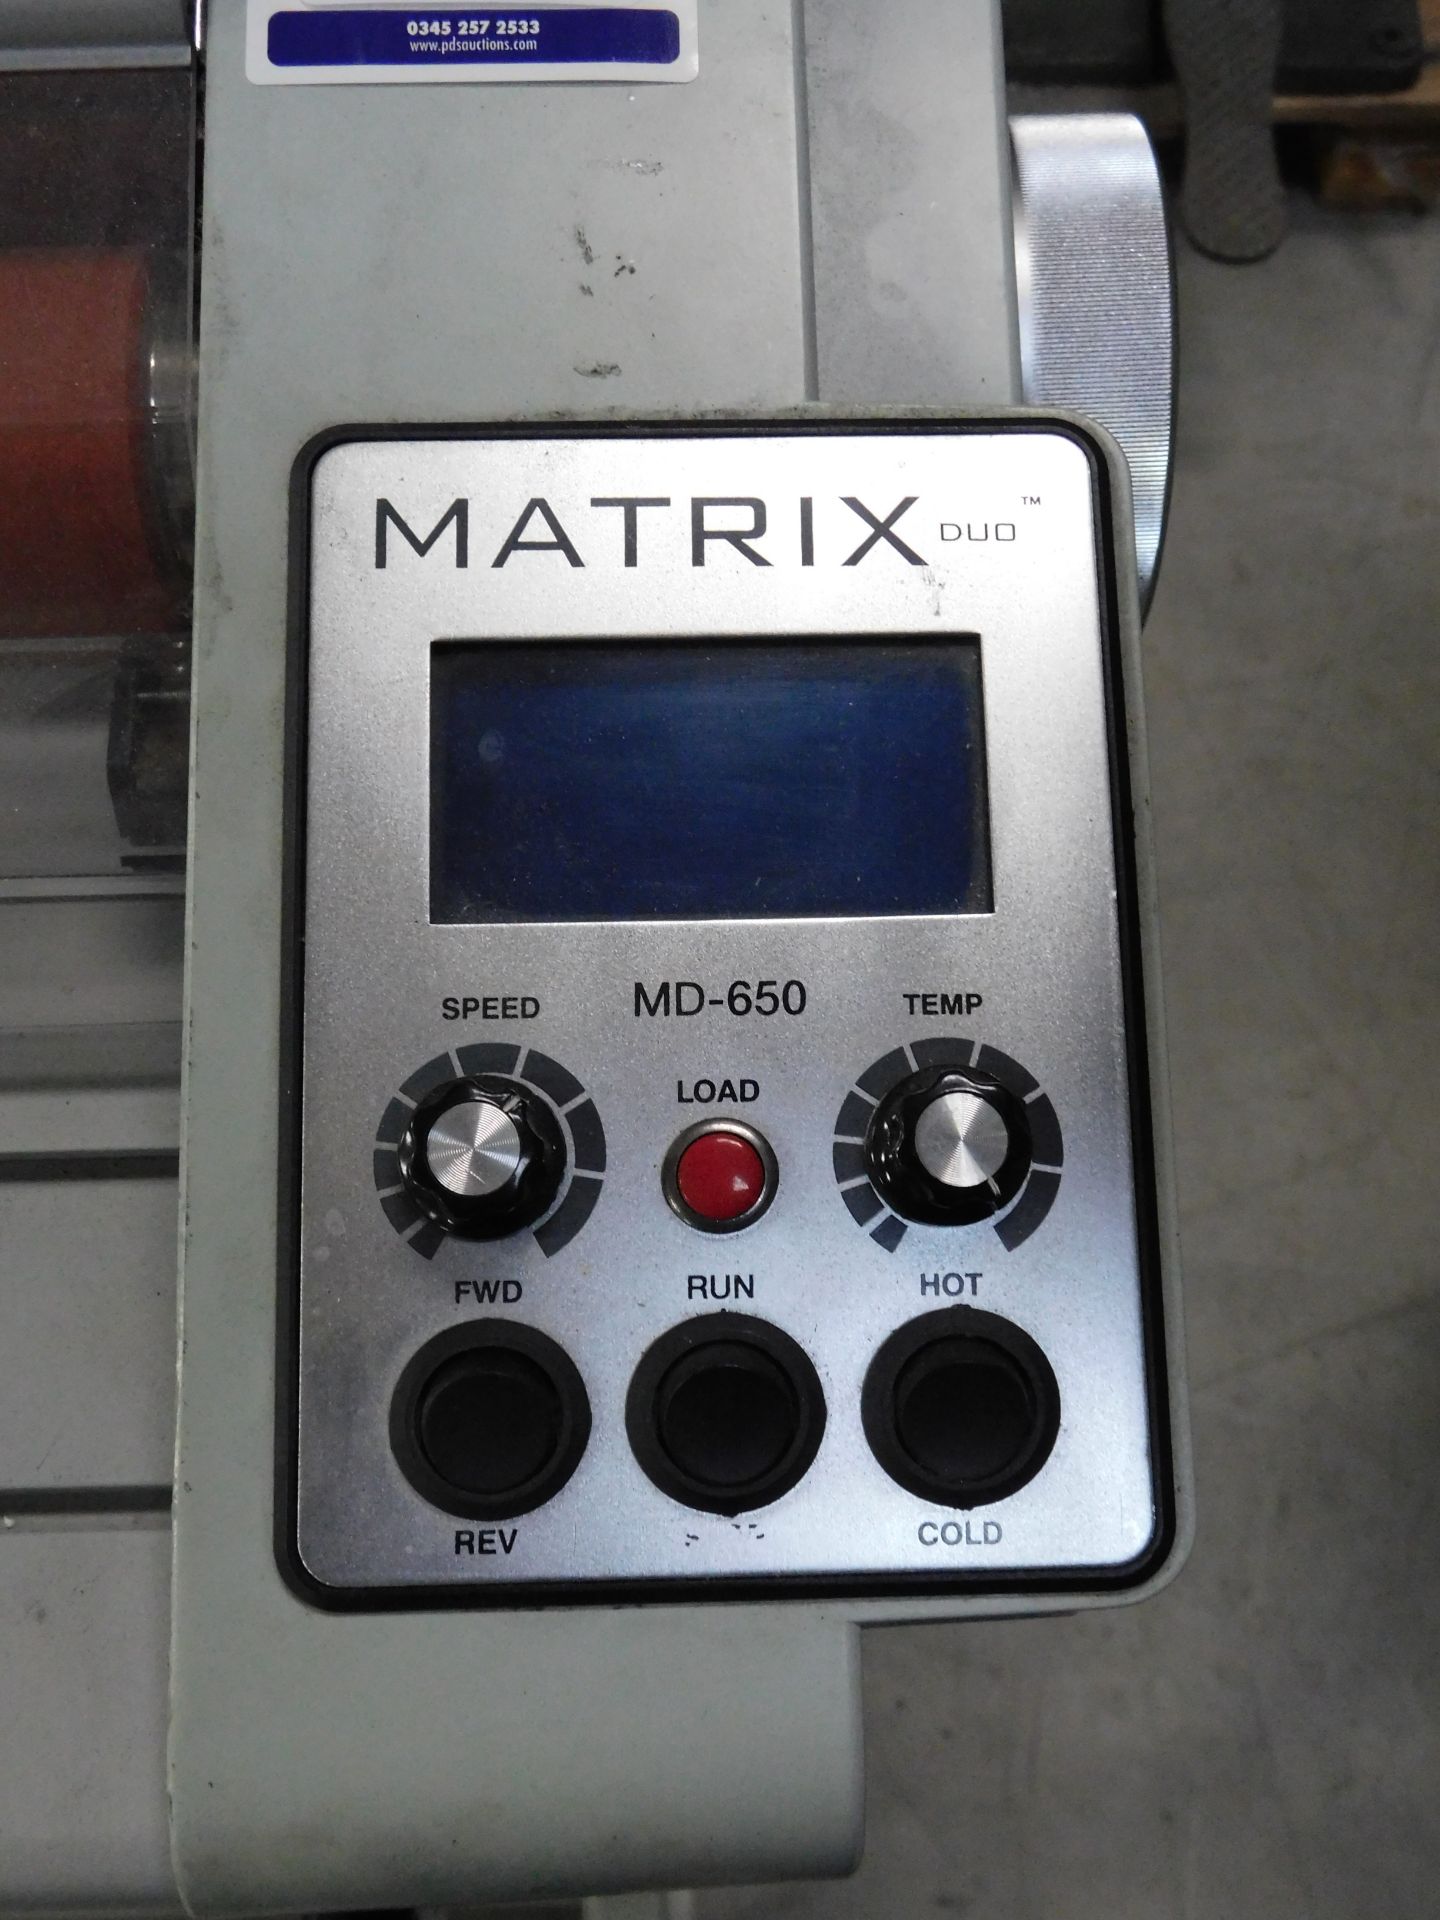 Matrix DUC MD650 Roll Laminator (Location Brentwood. Please Refer to General Notes) - Image 2 of 3